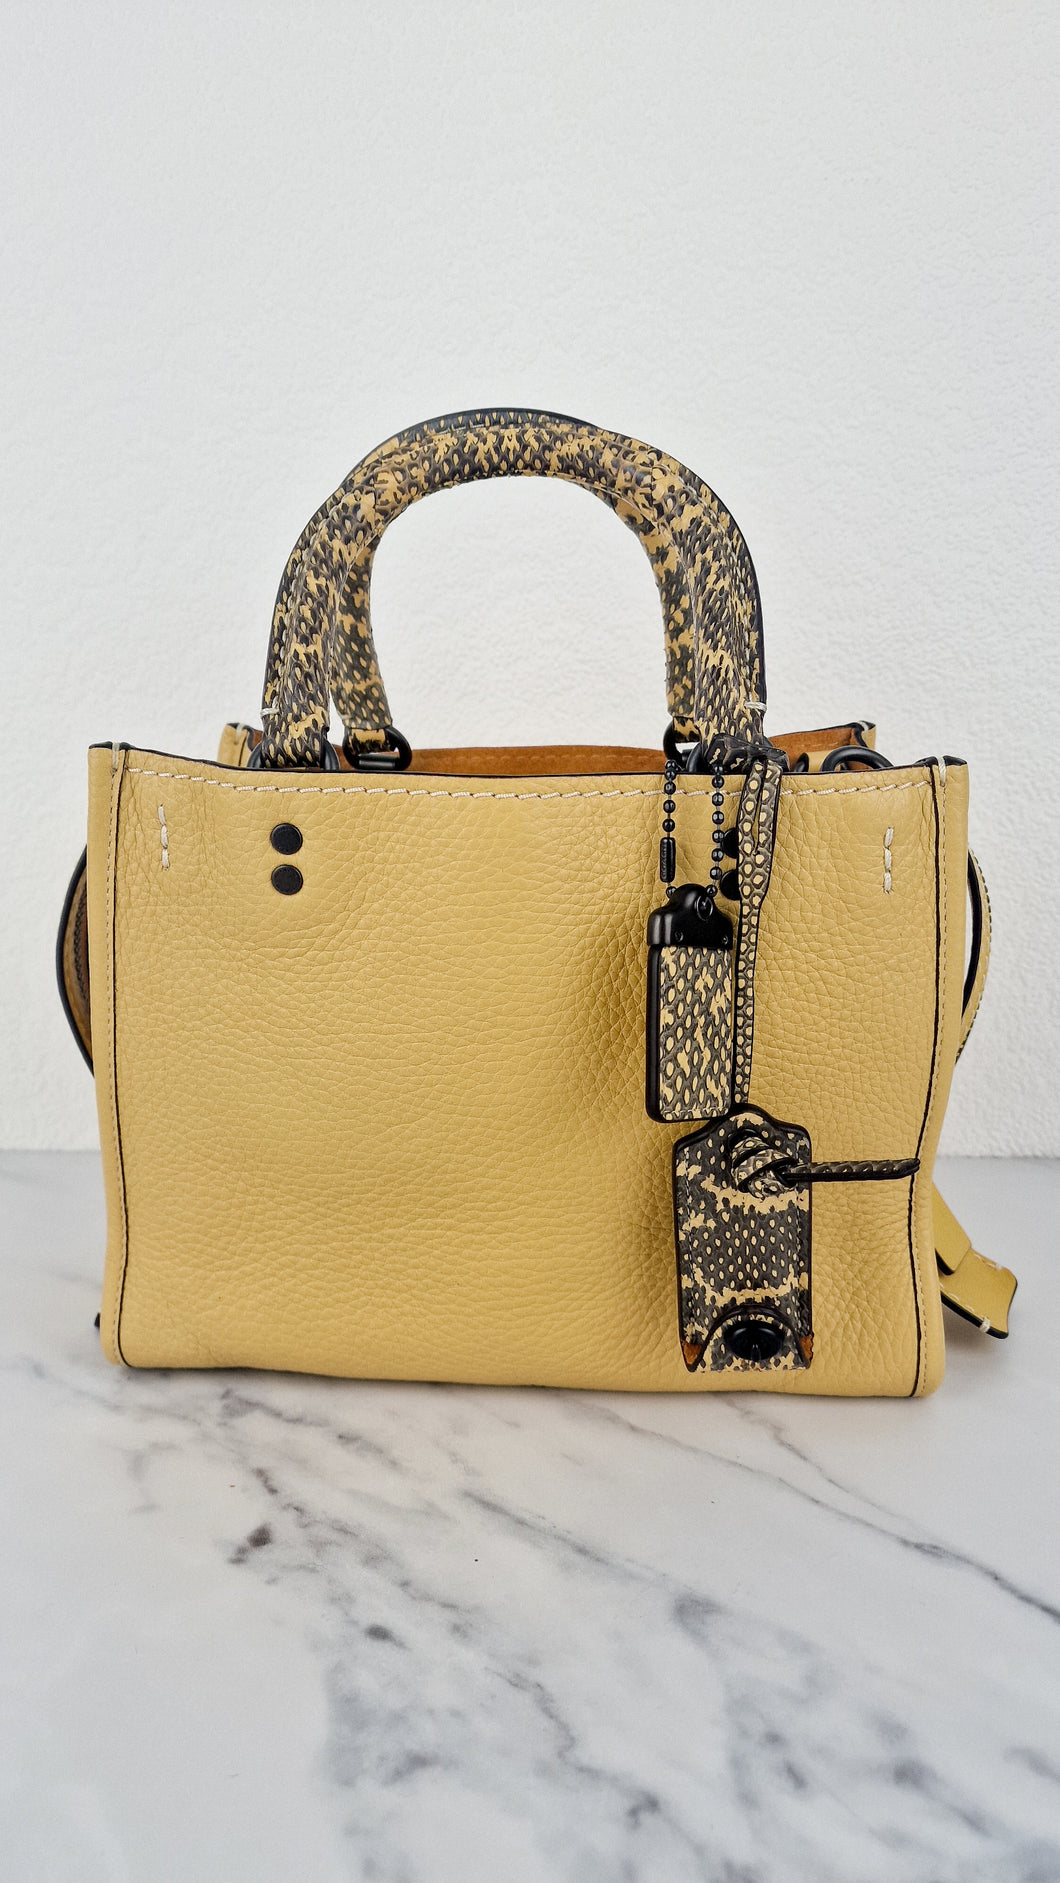 Coach 1941 Rogue 25 in Hay Yellow with Snakeskin Handles - Shoulder Bag Handbag in Pebble Leather Colorblock - Coach 59235